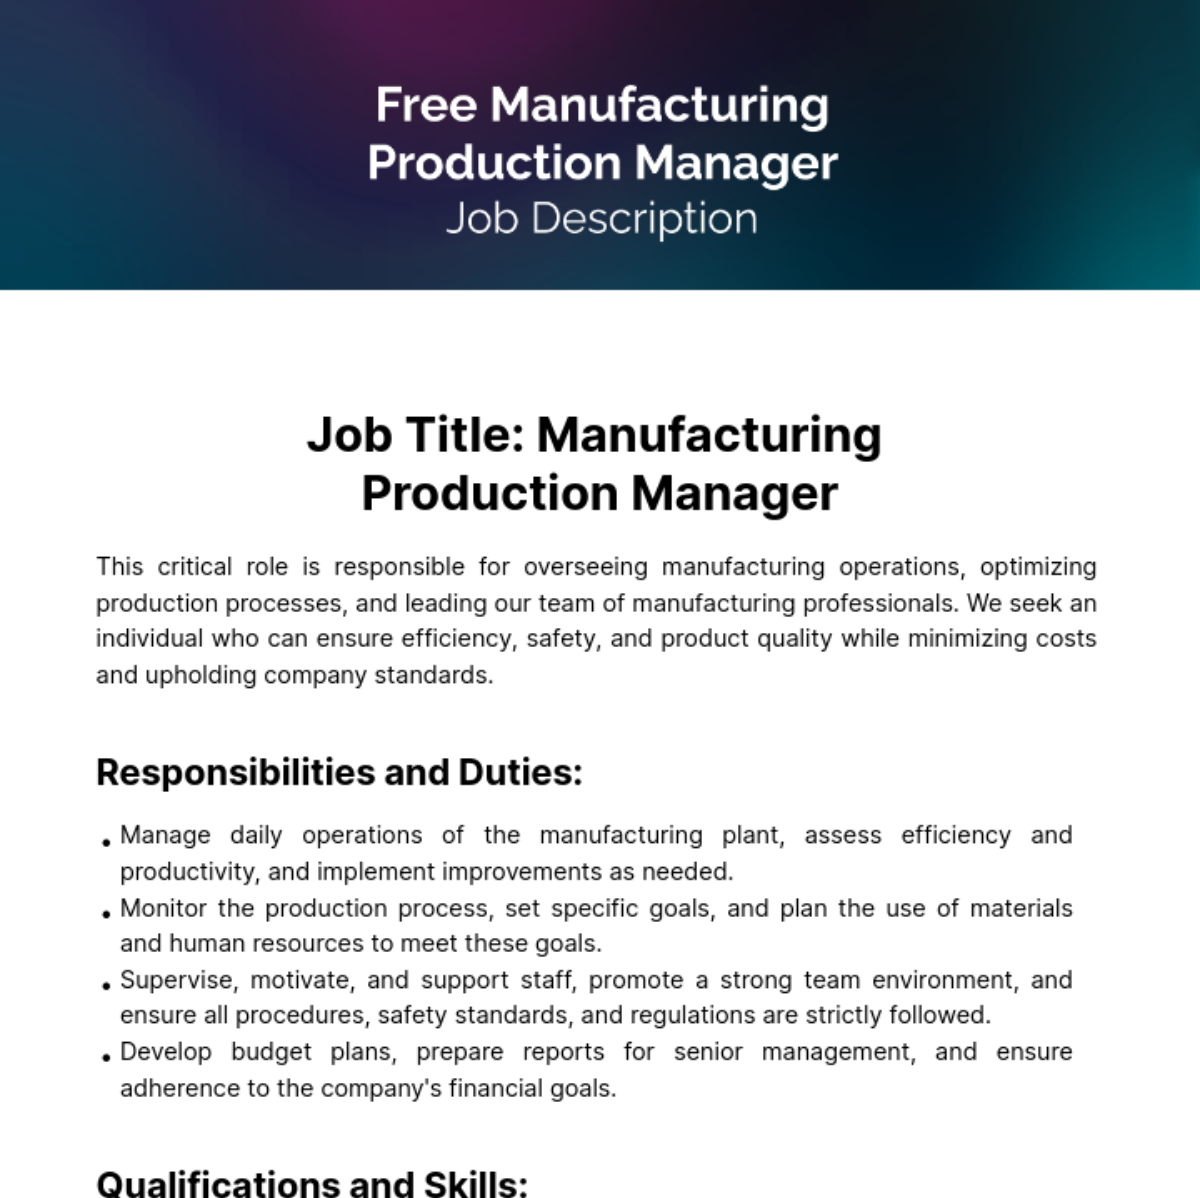 Free Manufacturing Production Manager Job Description Template